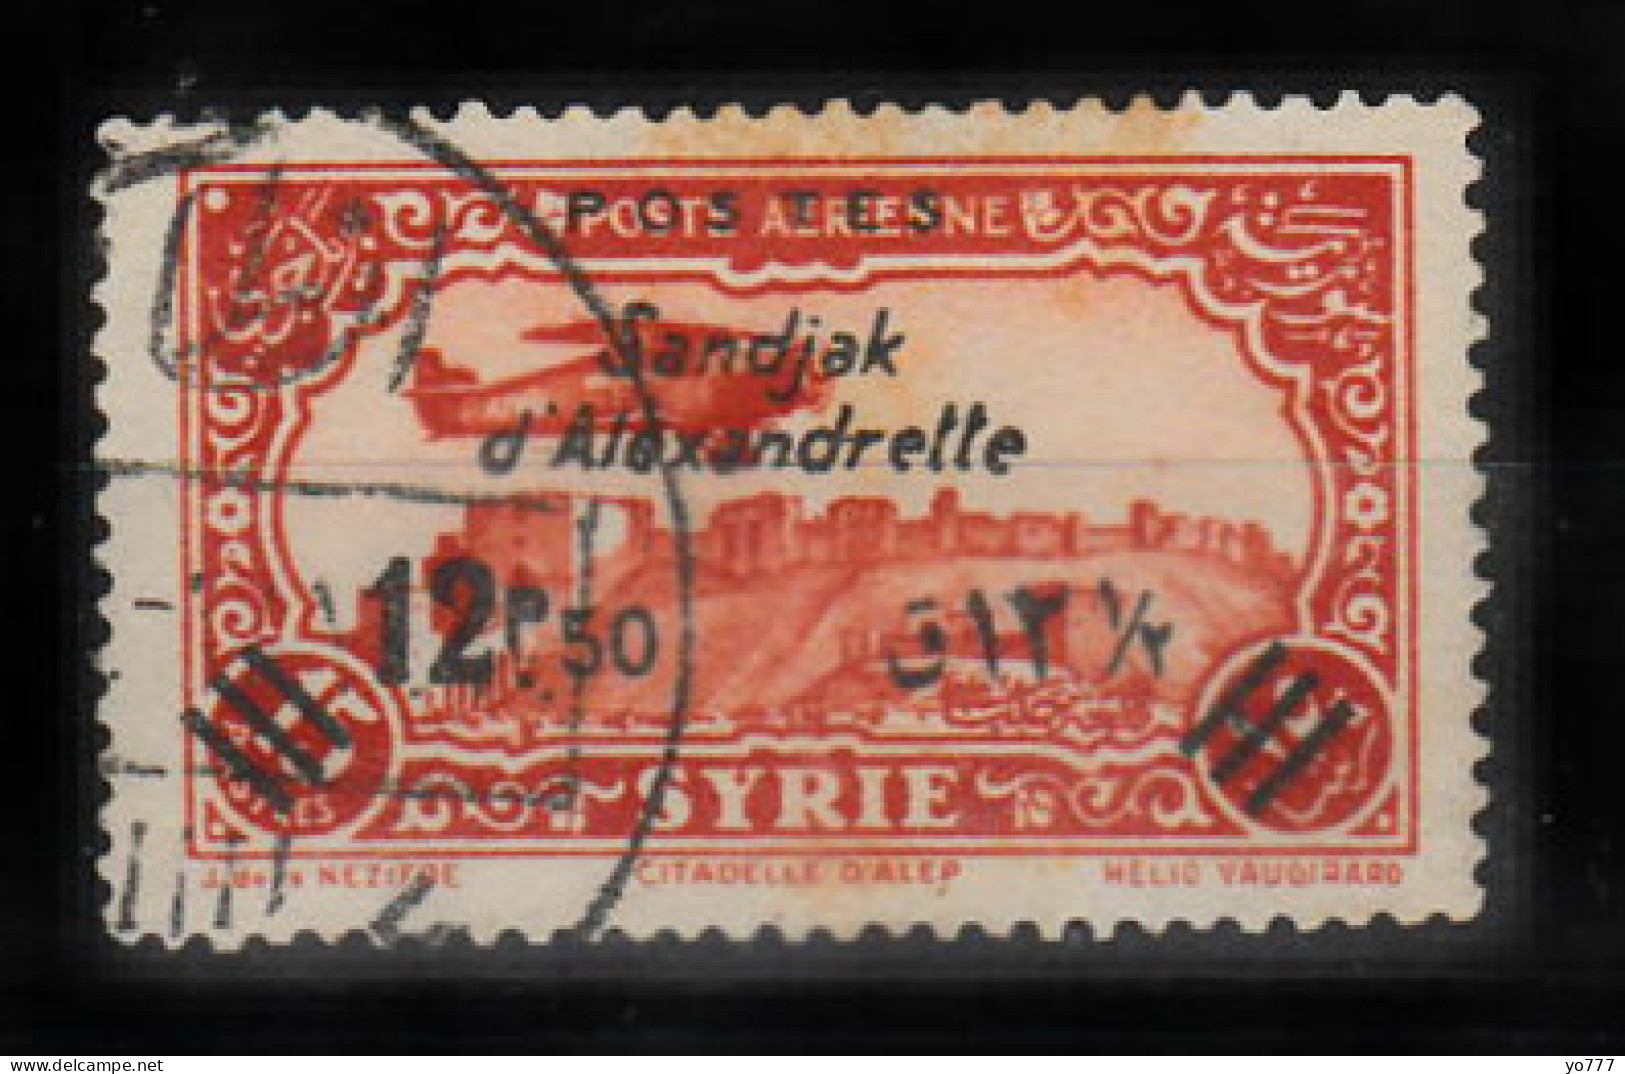 (H-012) 1938 HATAY STAMPS WITH BLACK SANDJAK D'ALEXANDRETTE SURCHARGE ON SYRIA POSTAGE AIRPOST STAMPS USED - 1934-39 Sandjak Alexandrette & Hatay